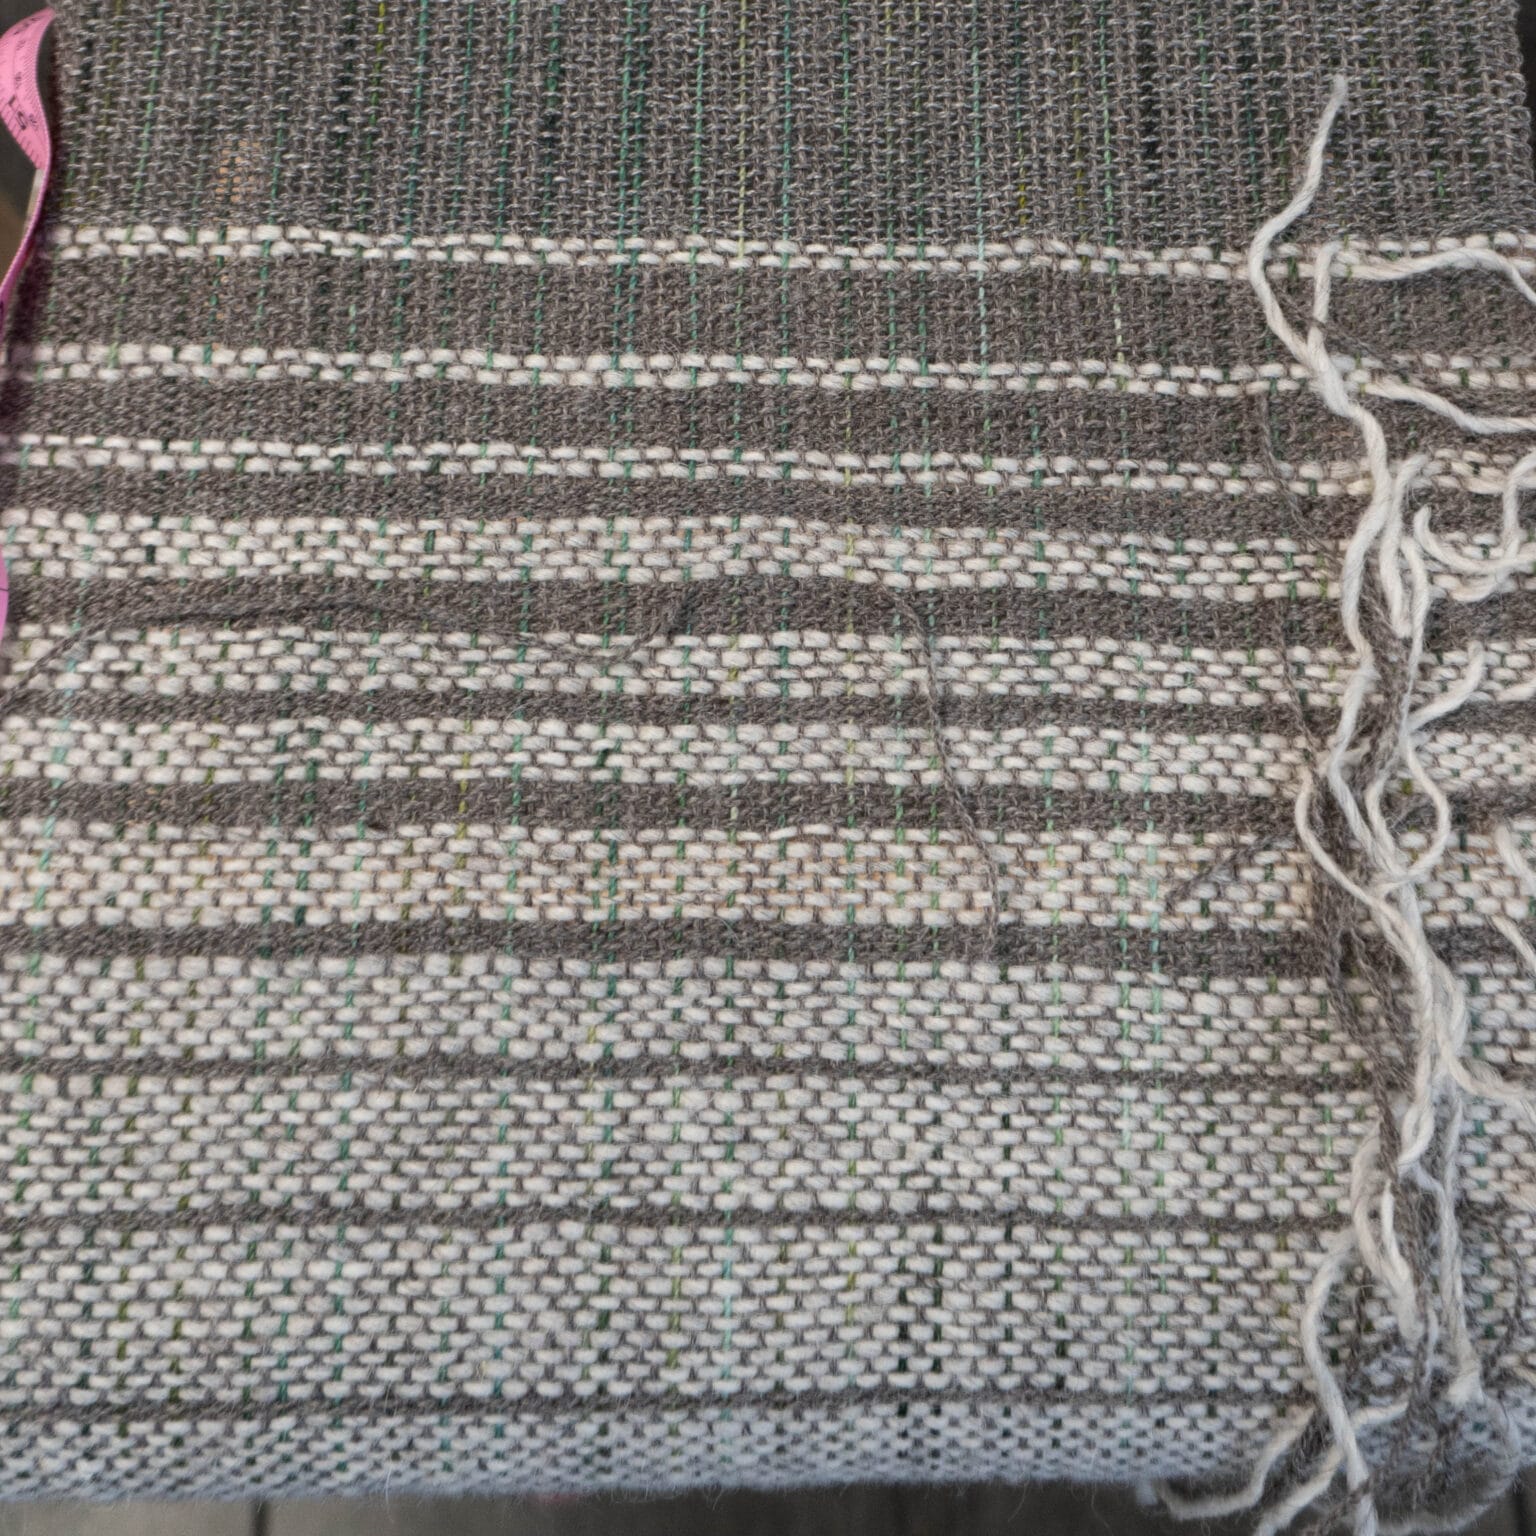 How to Plan a Weaving Project with Scrap Yarn